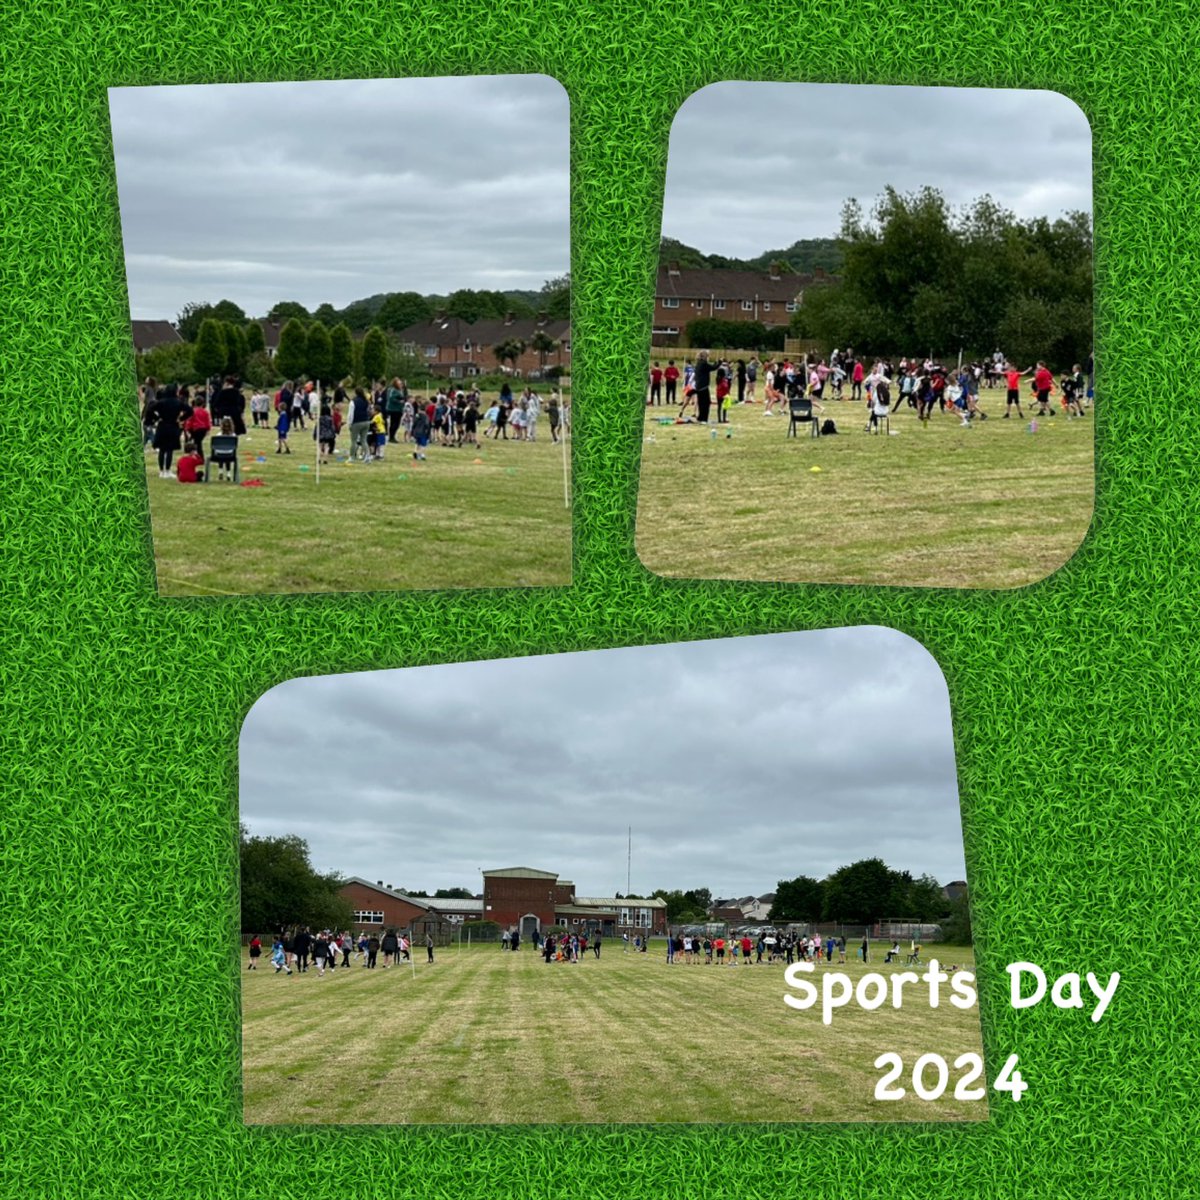 Our Sports Day is off to a fantastic start with the whole school out on the field with @CCFC_Foundation and their Cardiff City Joy of Movement Morning. #SportsDay #CommunityFun #ActiveKids #Sportsmanship #Teamwork #PhysicalEducation #HealthyConfidentIndividuals